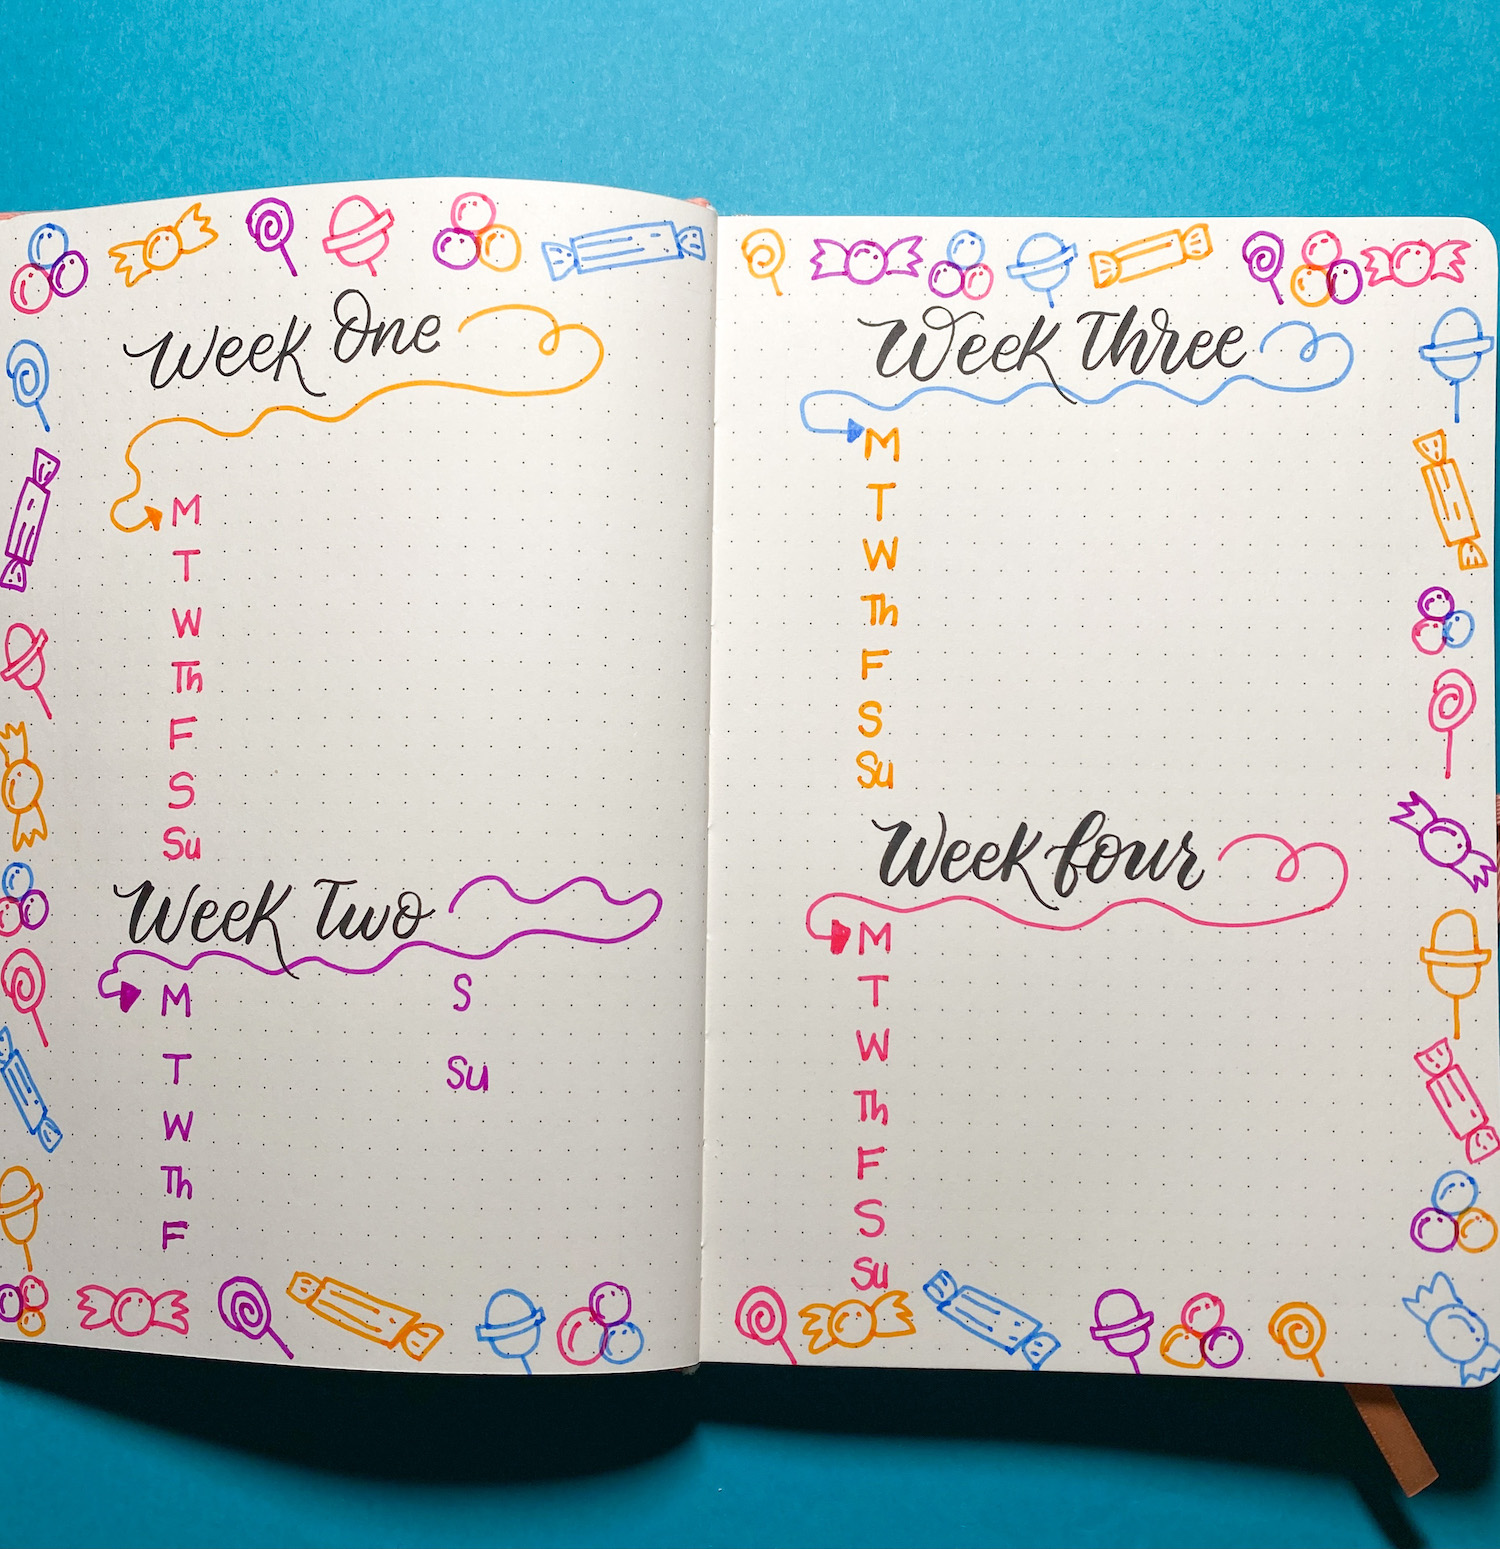 How to create a candy themed gratitude journal by Danielle Webb #Twintonemarker #sprinklesofzeal #tombowusa #gratitudejournal #dotjournal